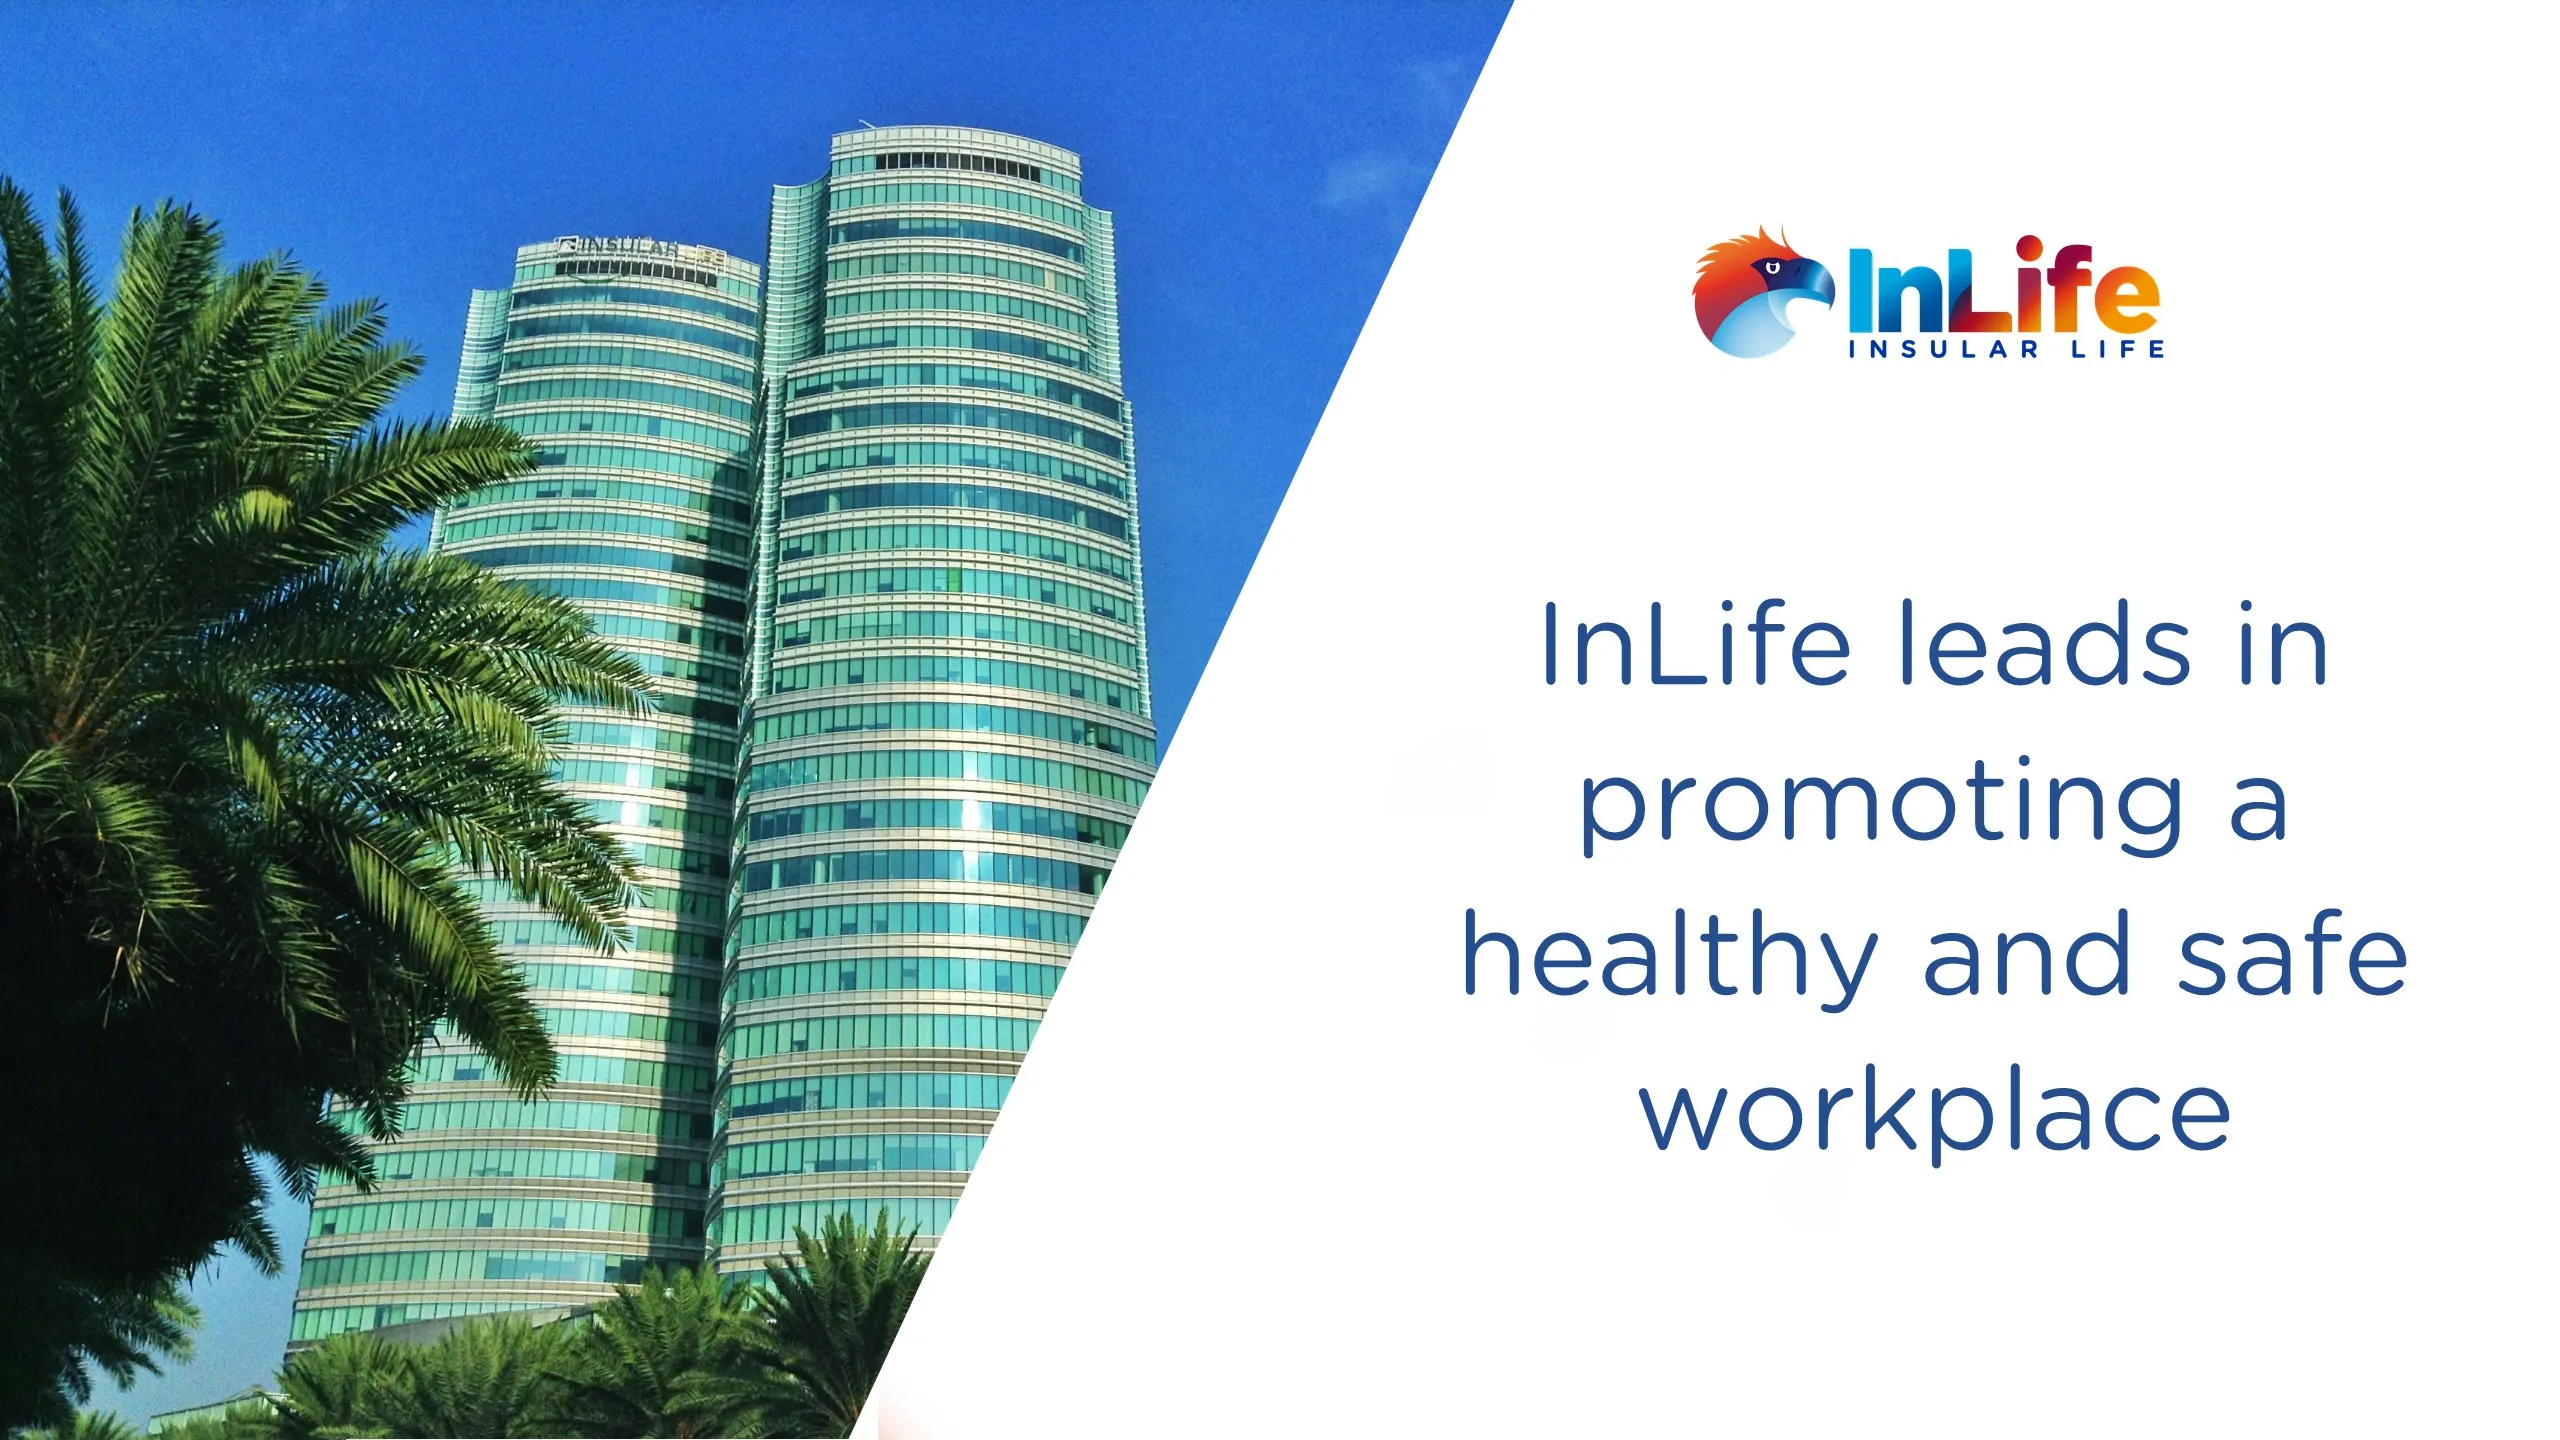 inlife-leads-in-promoting-a-healthy-and-safe-workplace